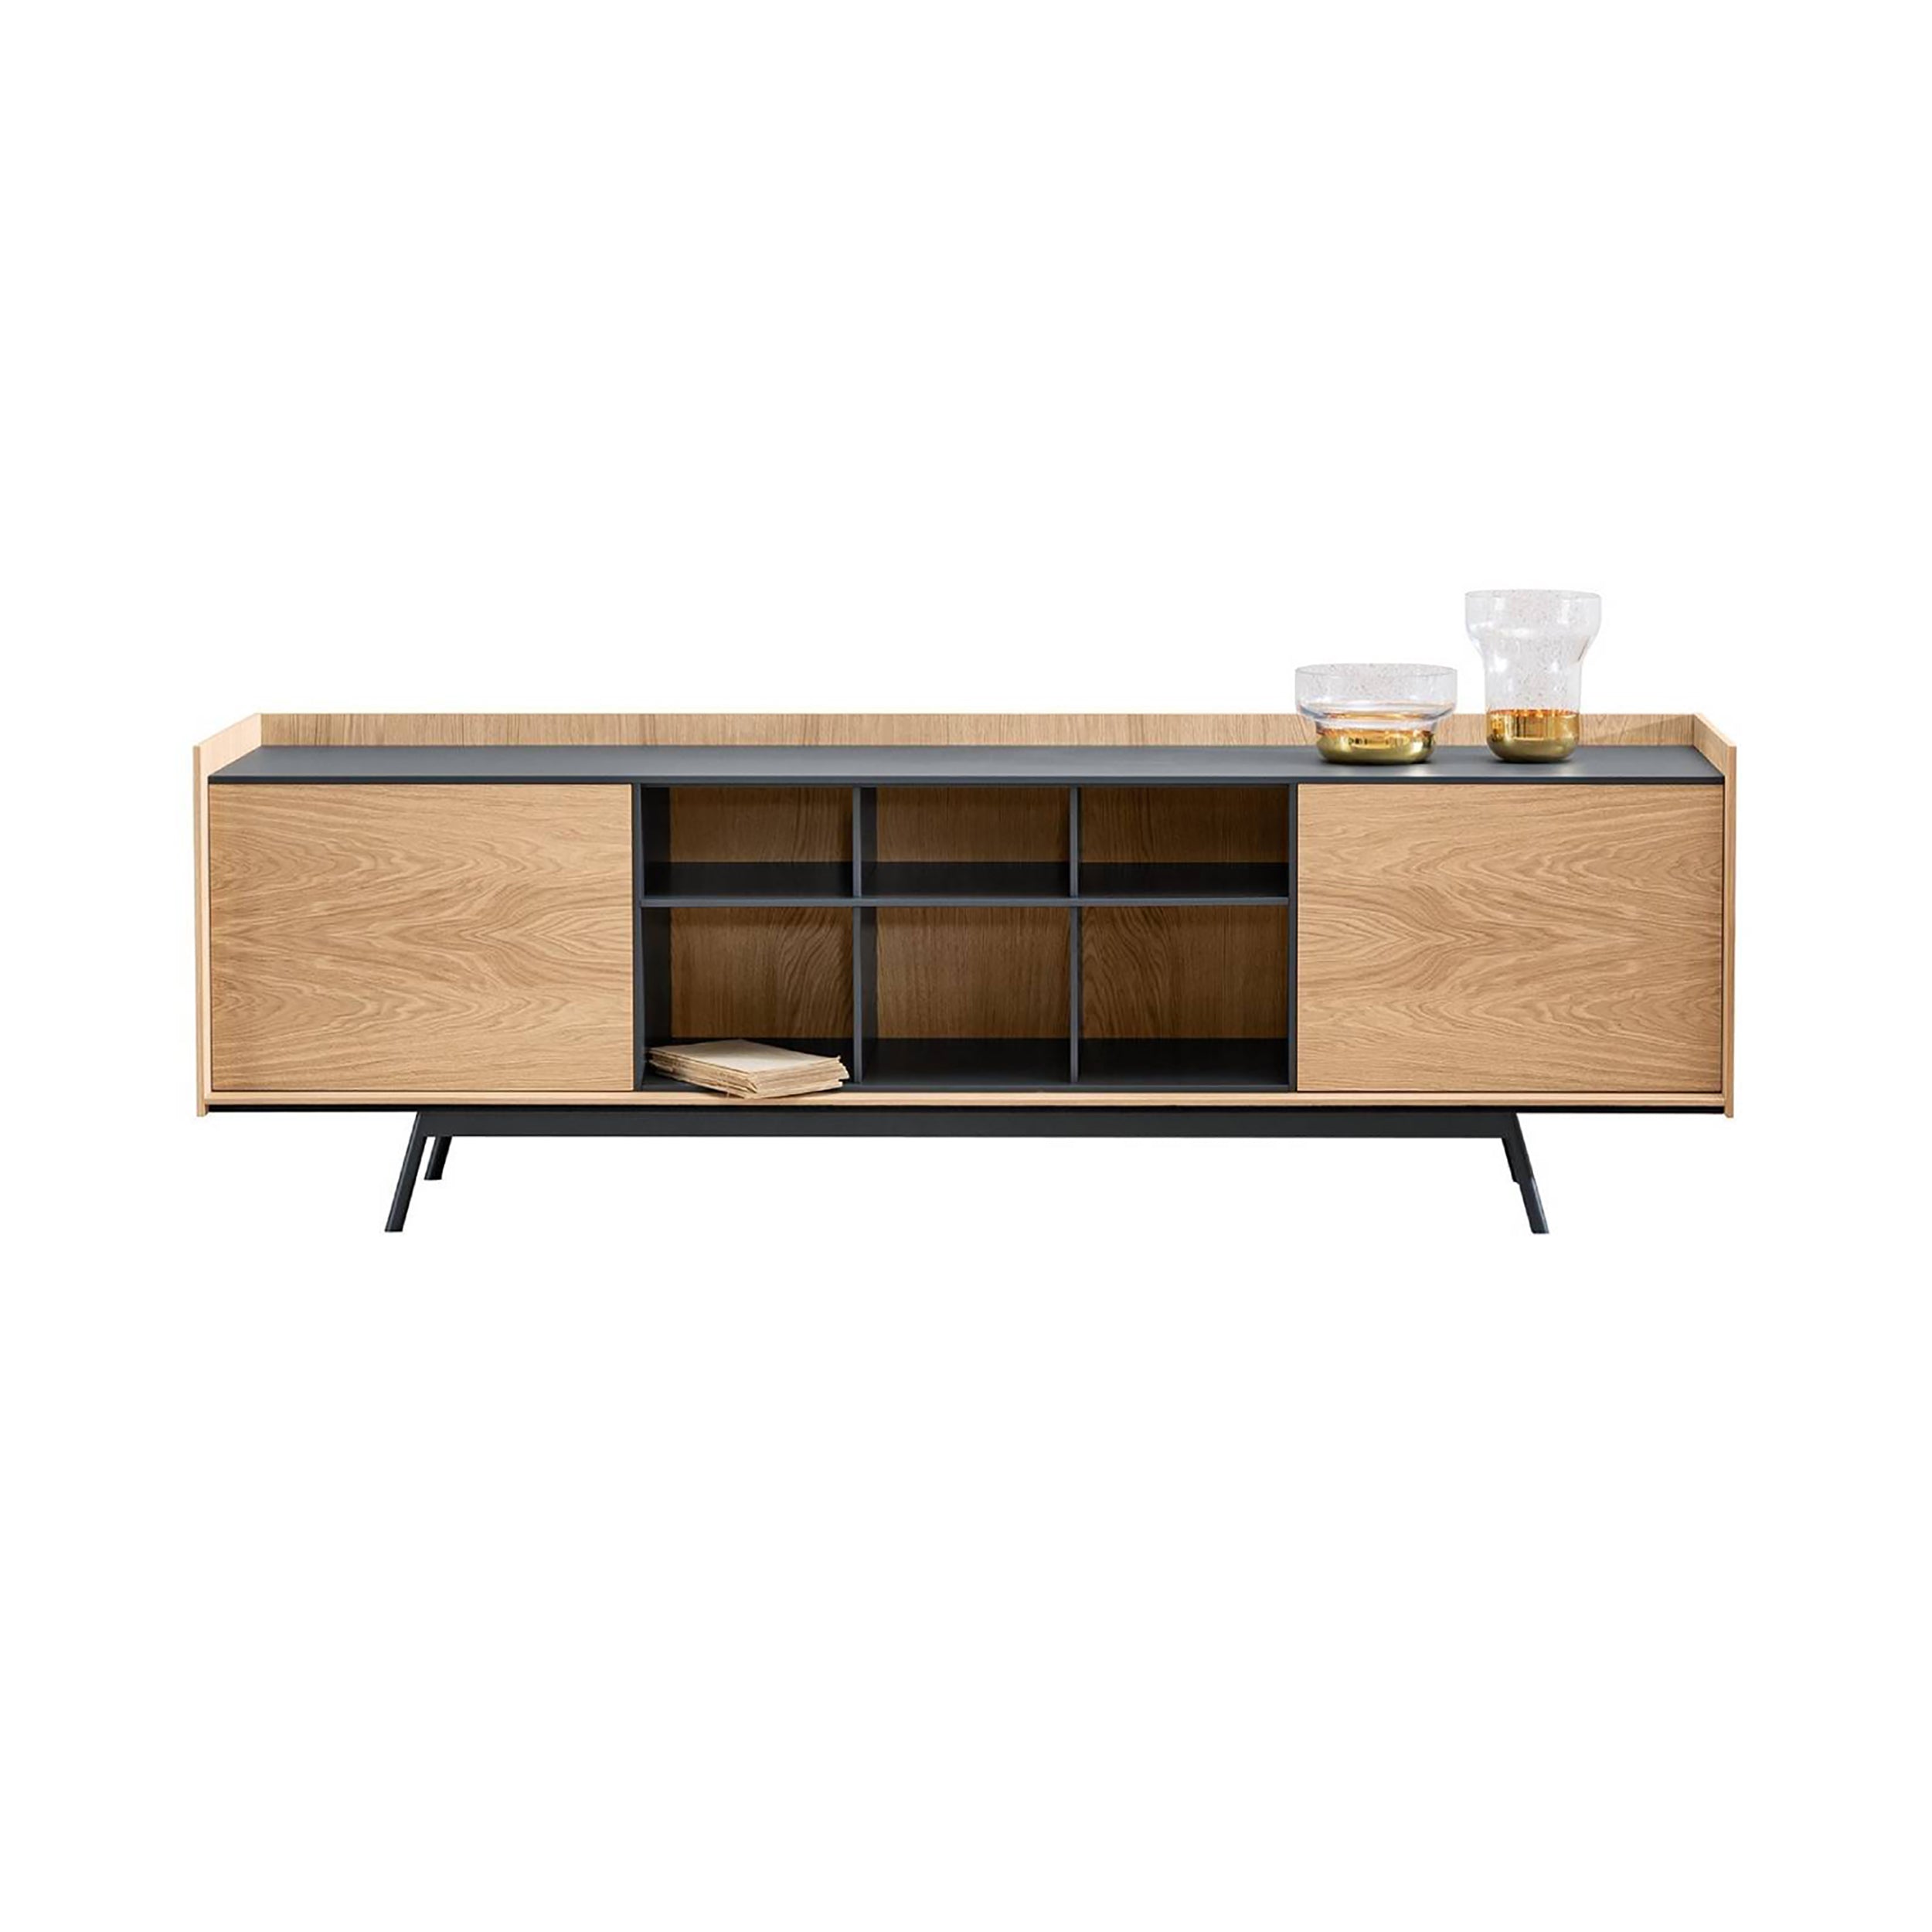 Edge Open Cabinet: Small + Lacquered Anthracite + Lacquered Black + Flamed Oak